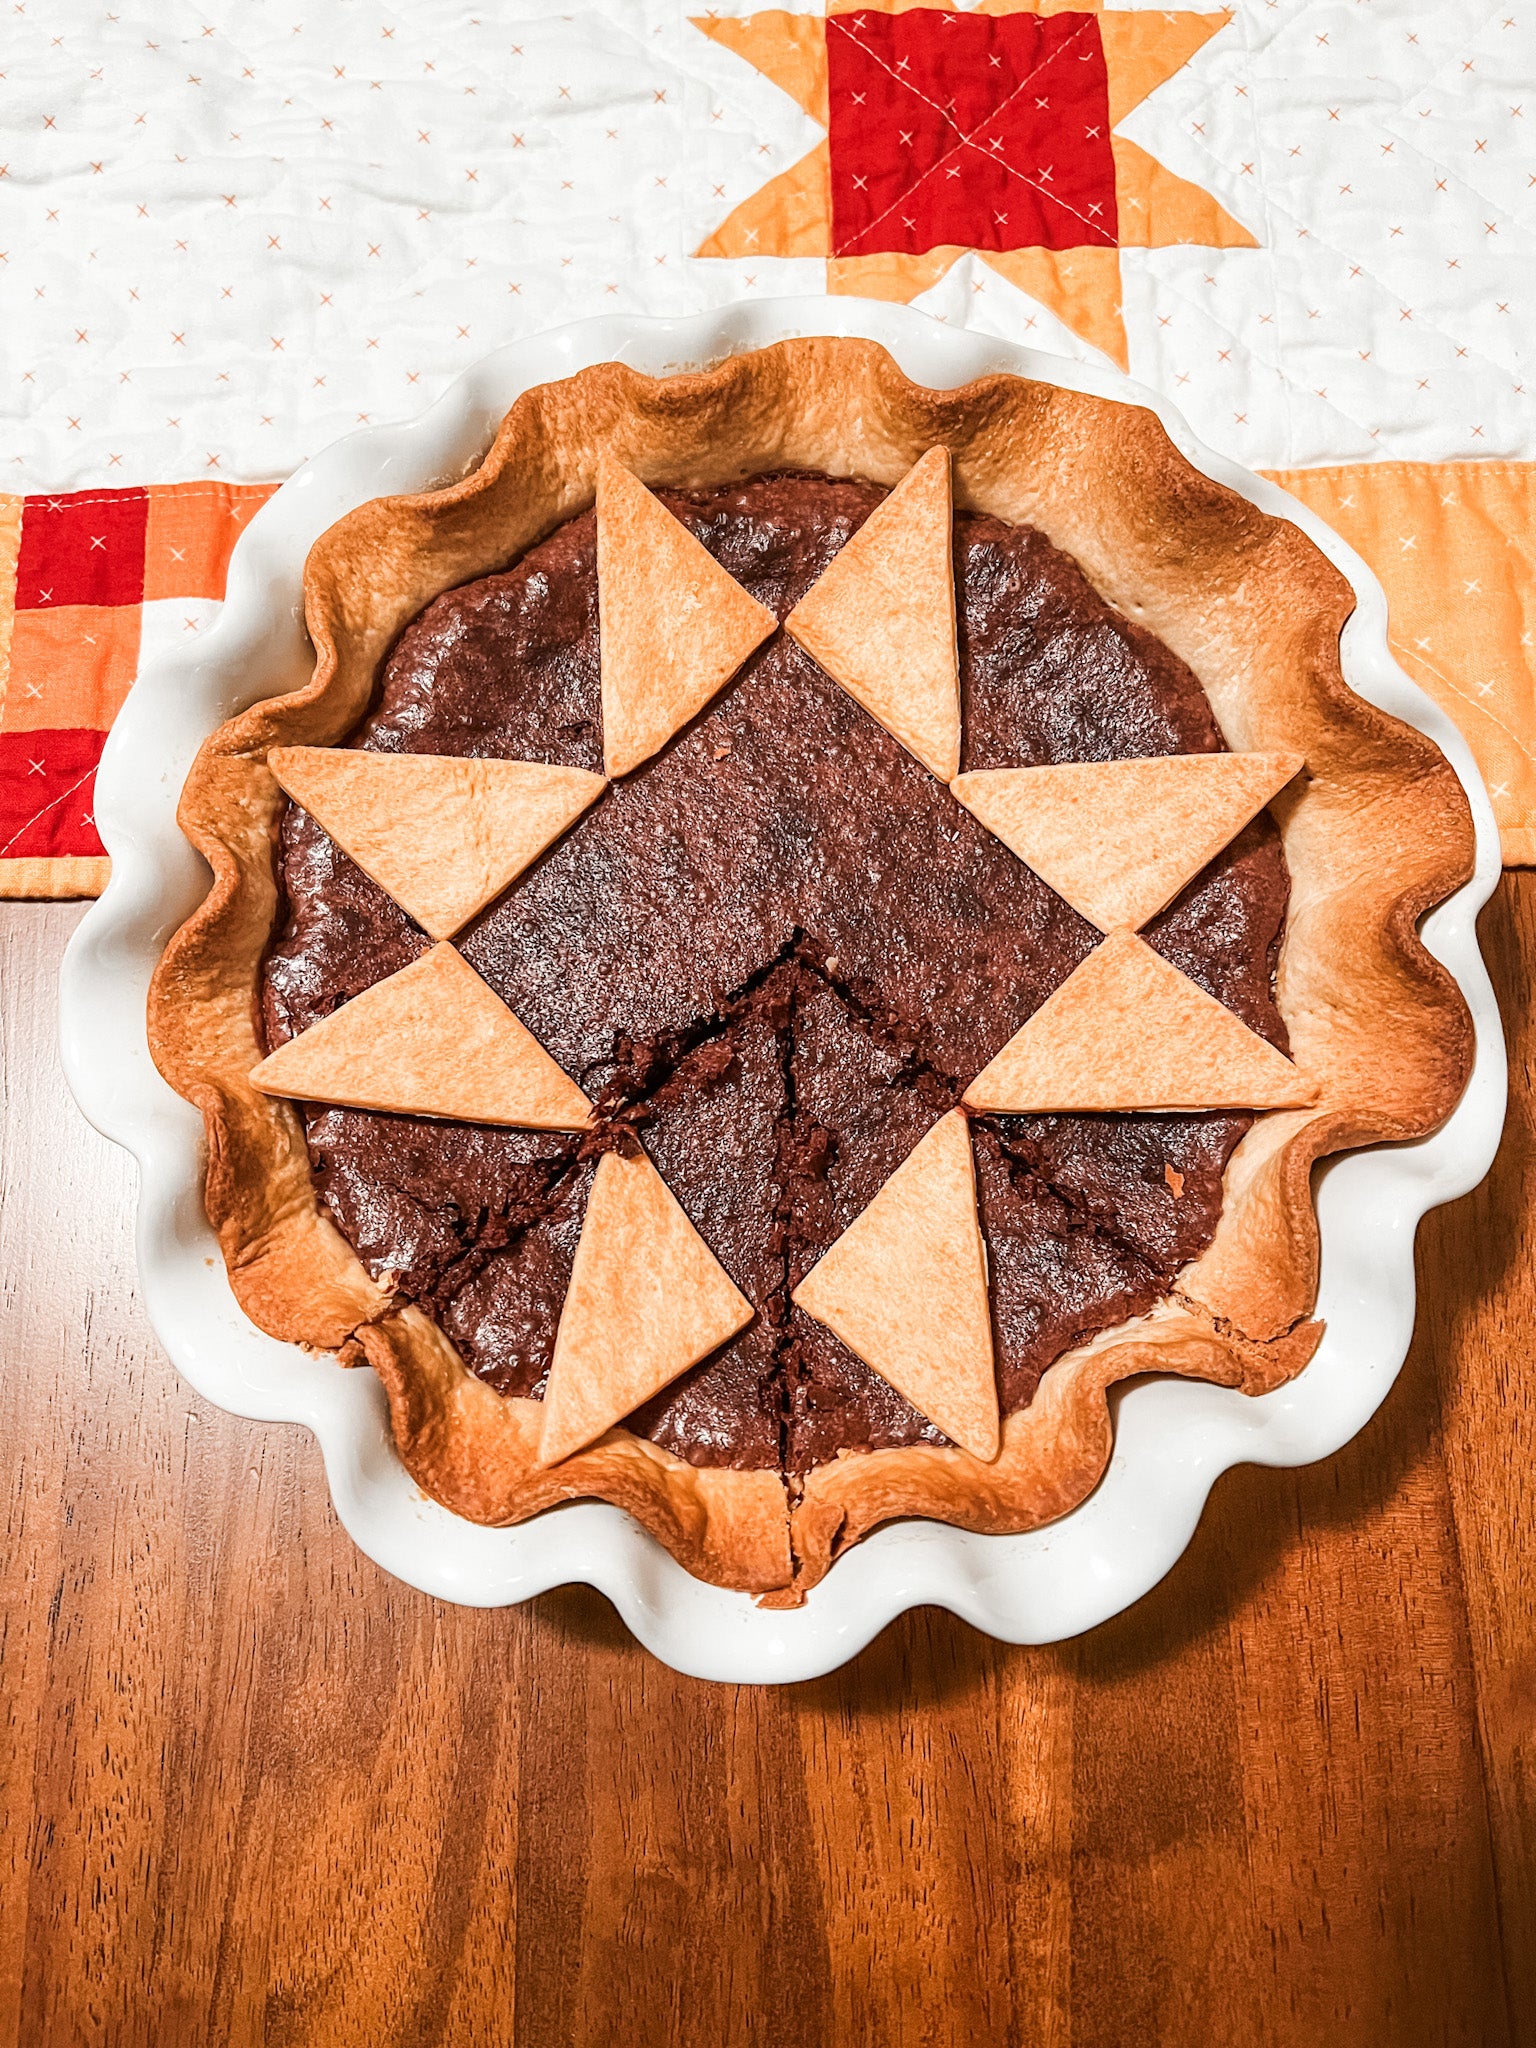 quilted pie cut evenly